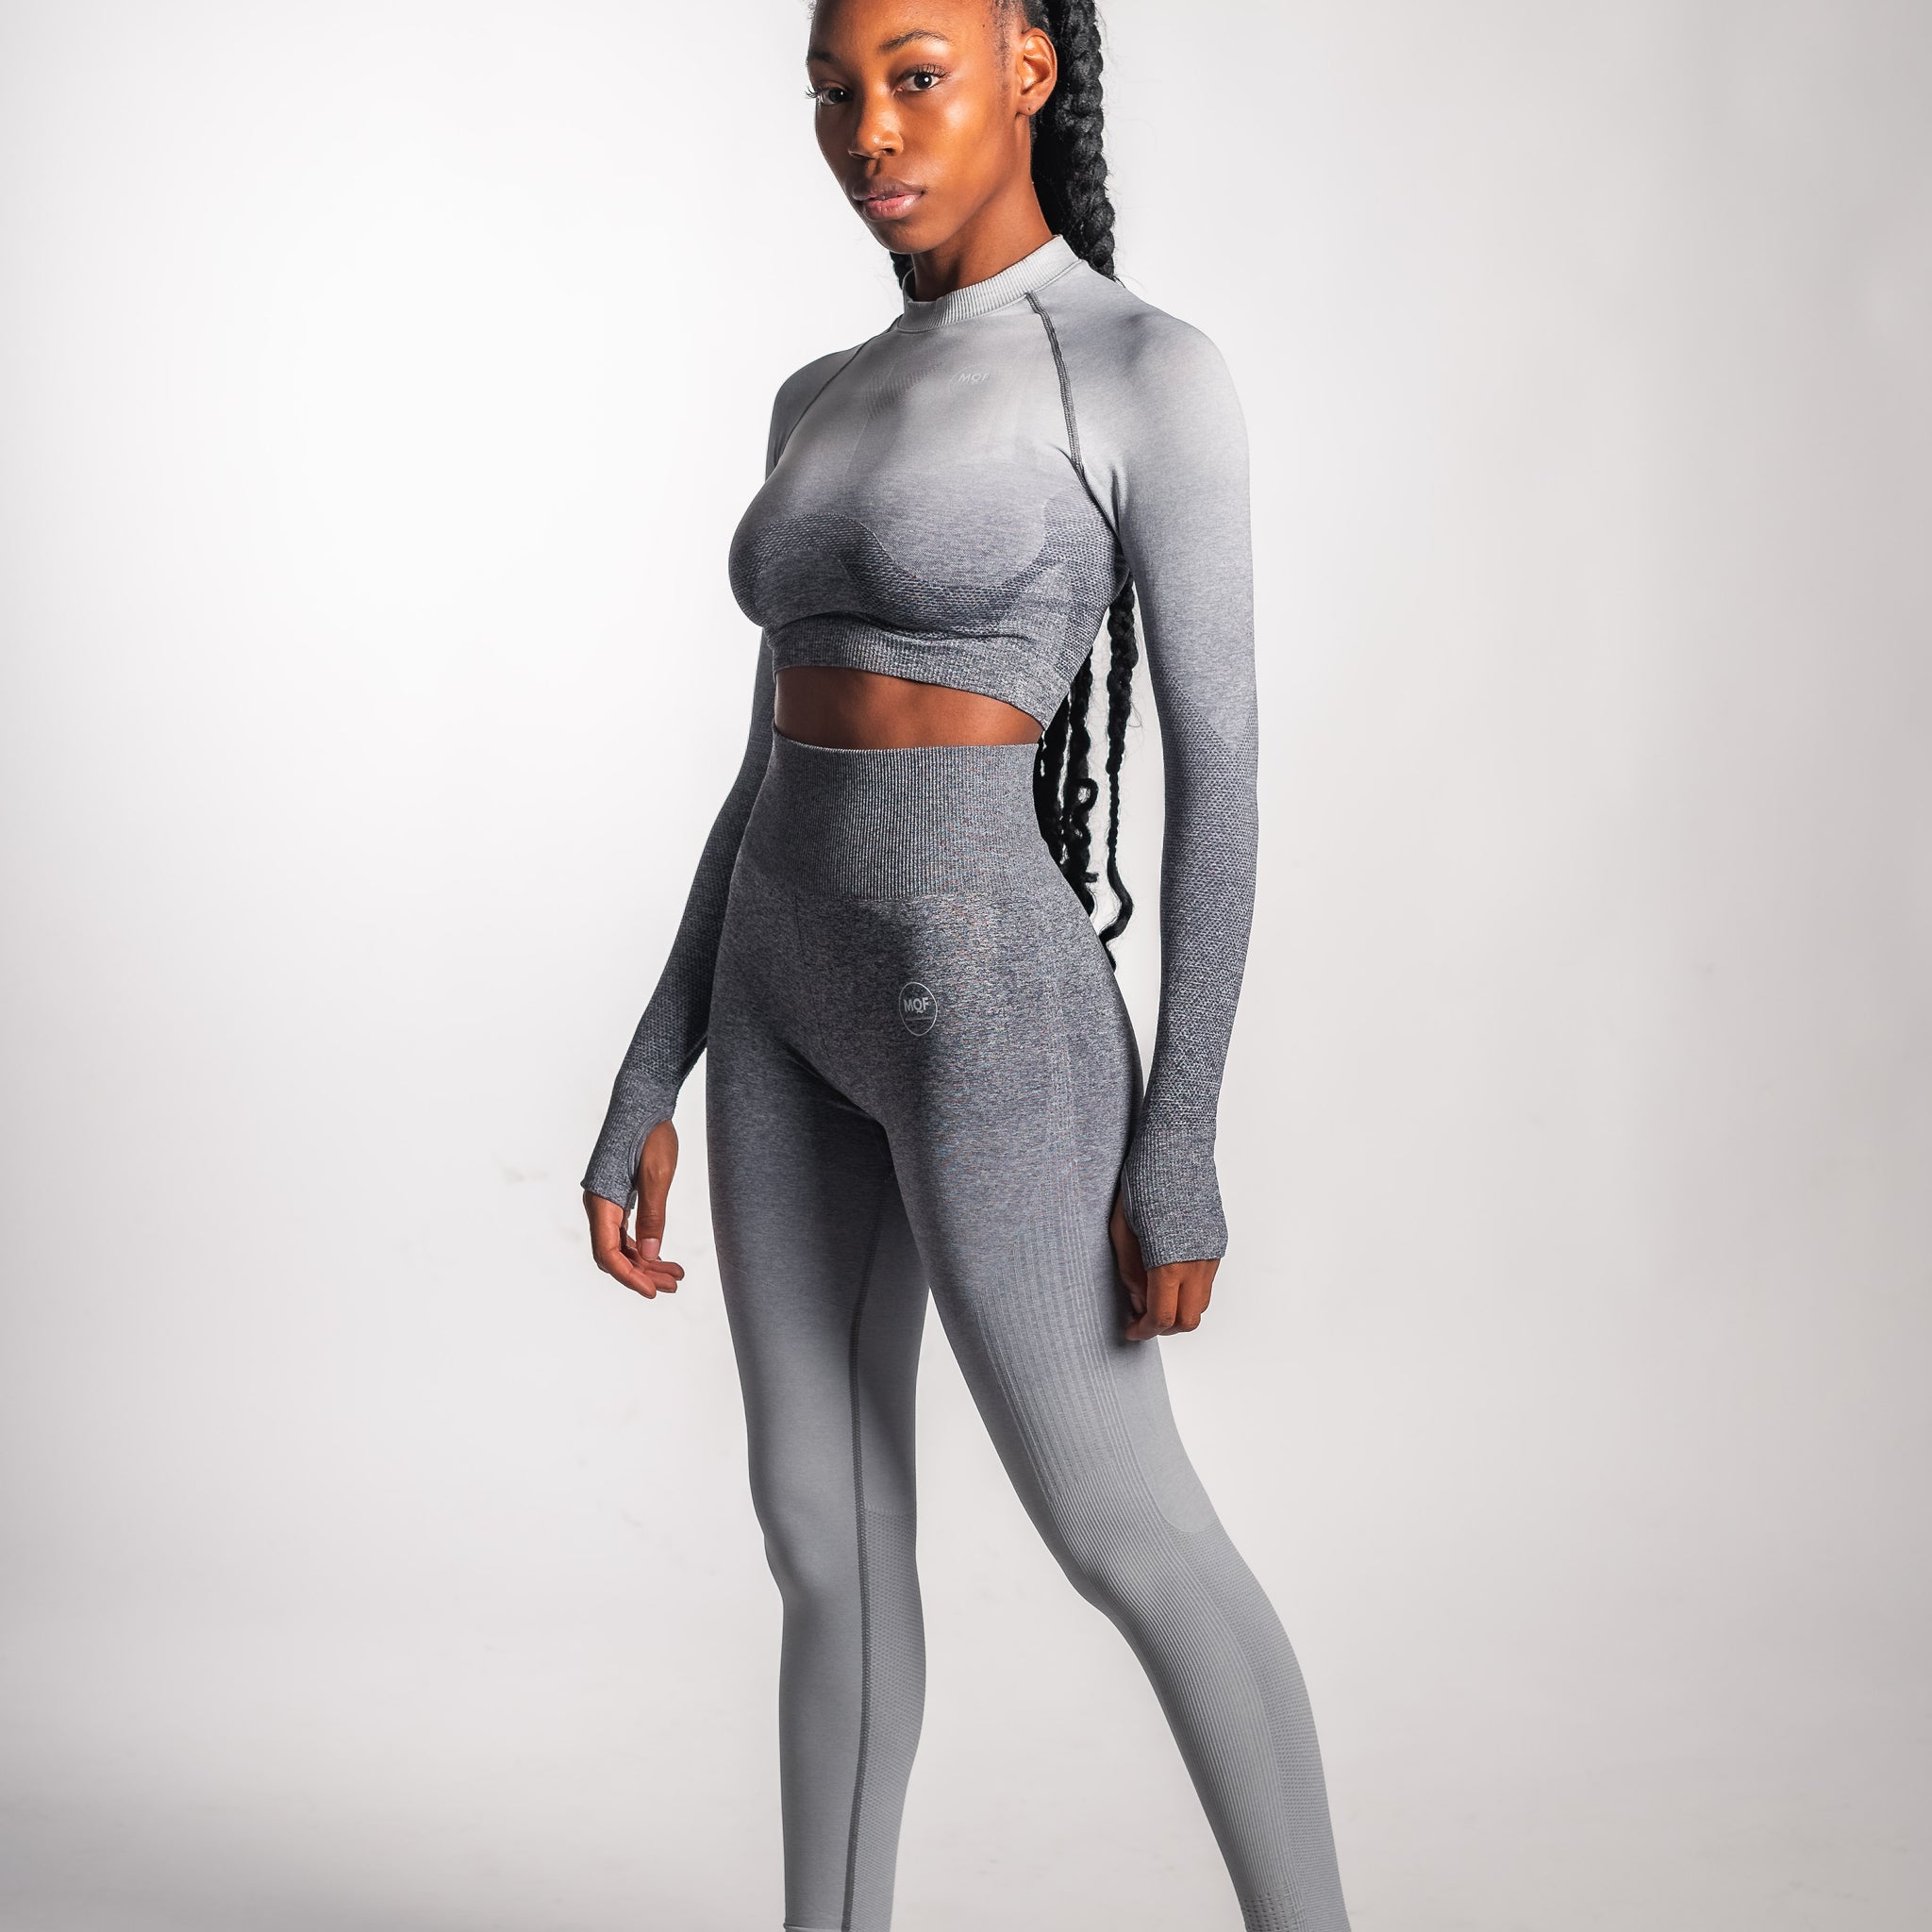 Ombré Leggings - MQF Fitness Clothing - Gray